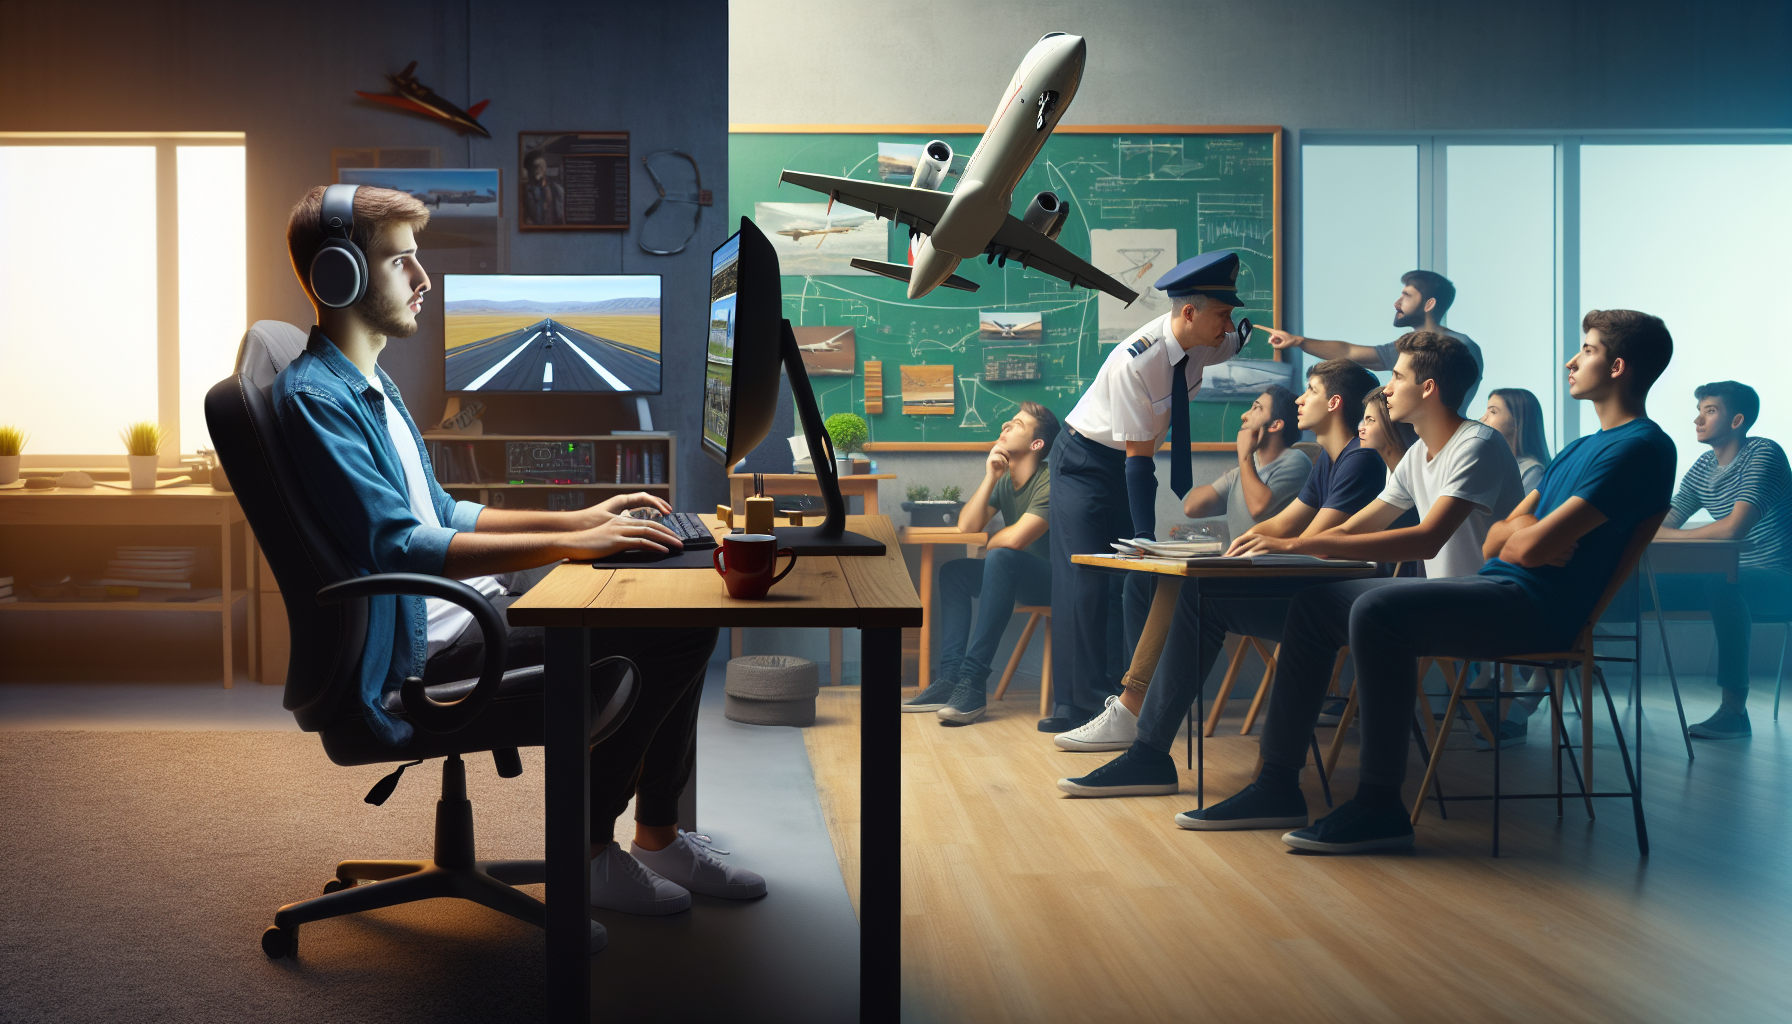 Illustration of online ground school vs. in-person training